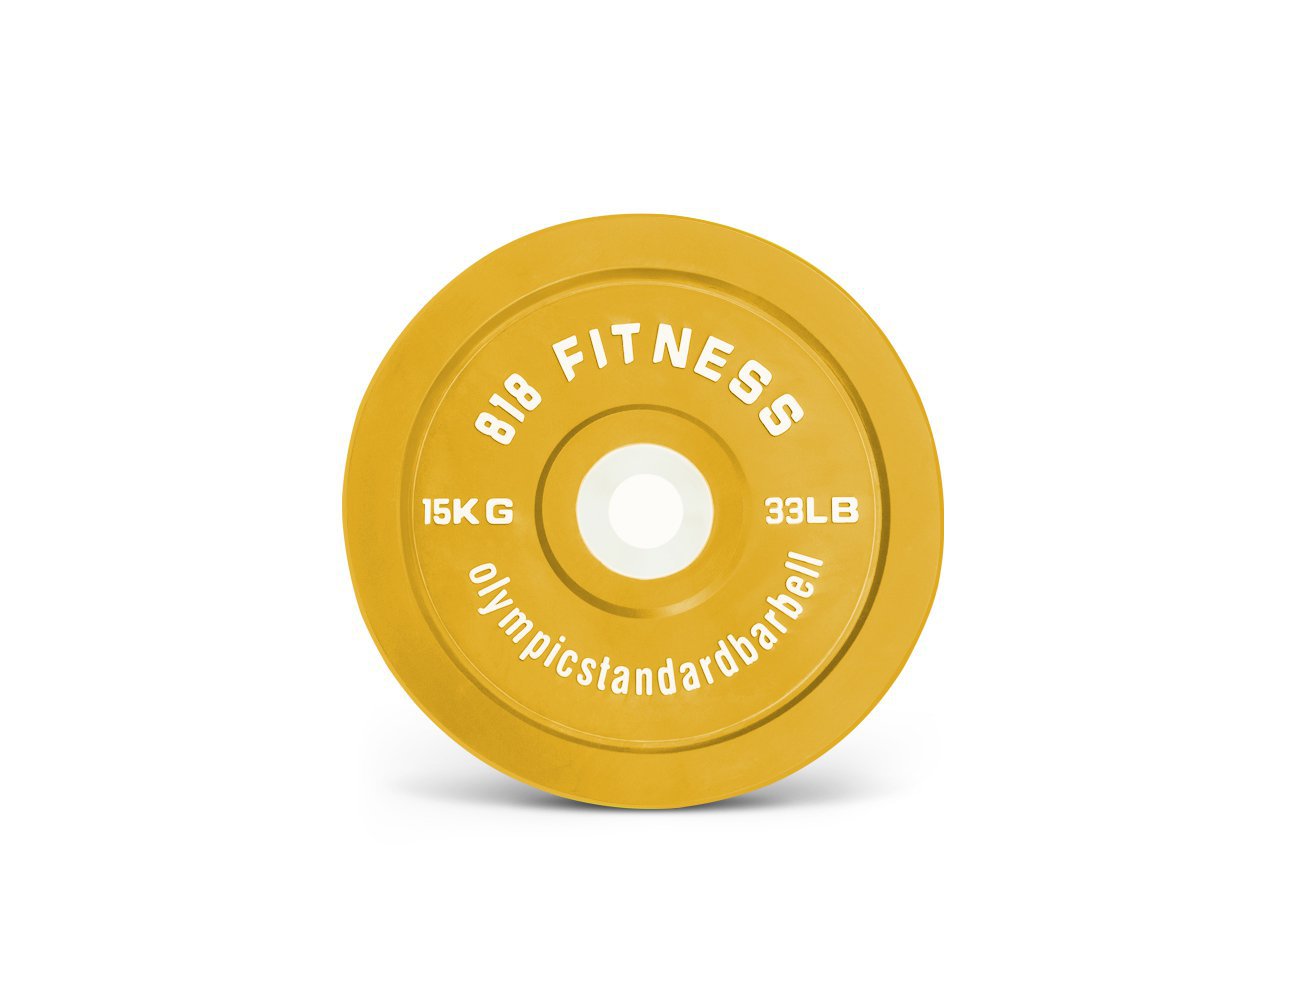 15kg Olympic Bumper Weight Plates x 2 Pieces